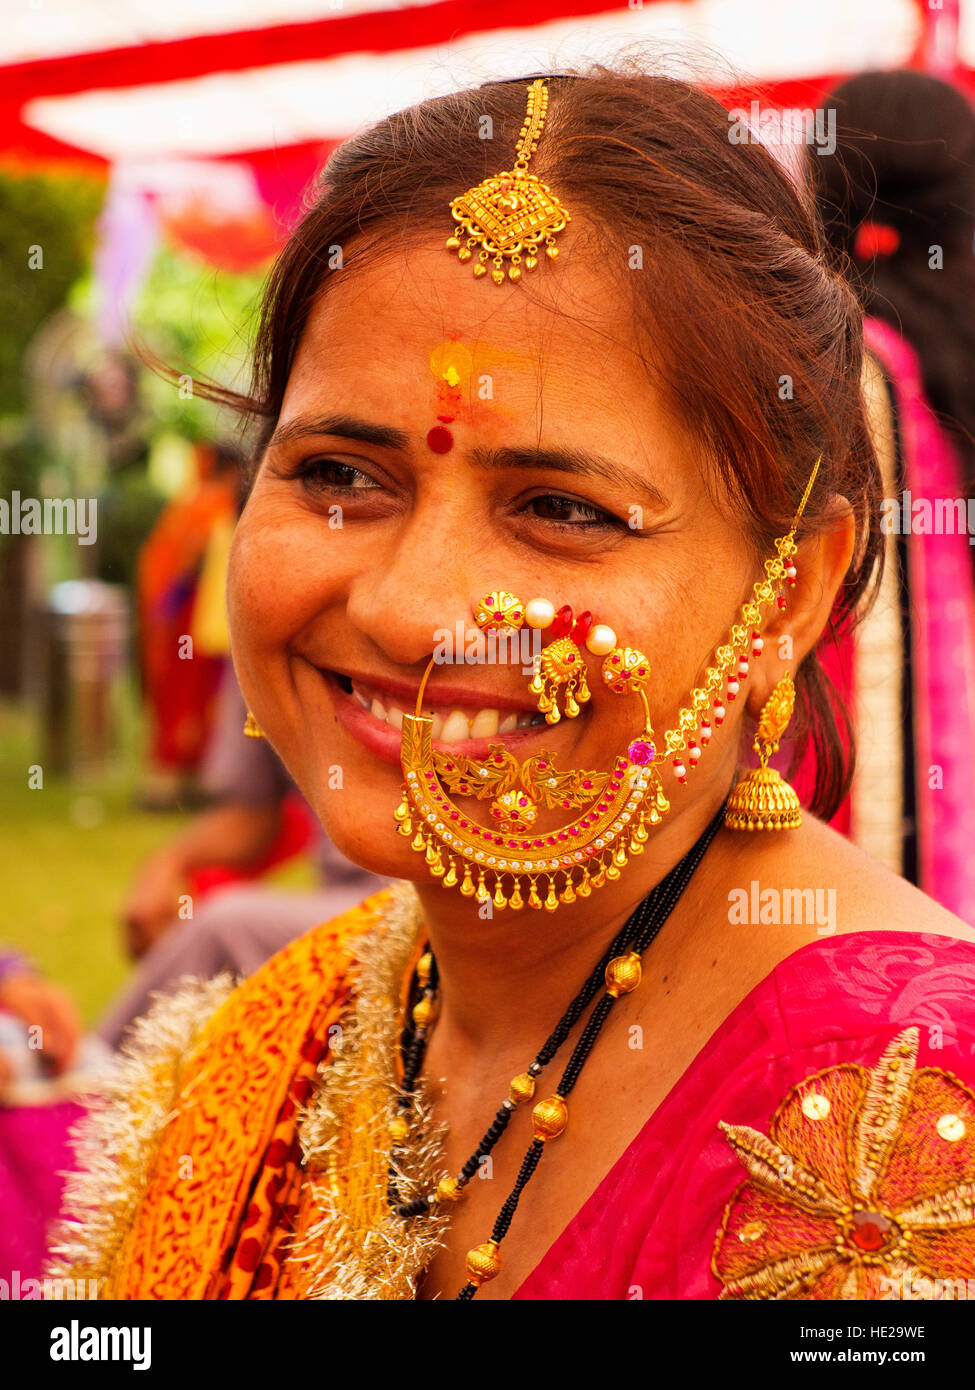 Bride smiling and ready for marriage full adorned indian style, Ramnagar, India Stock Photo